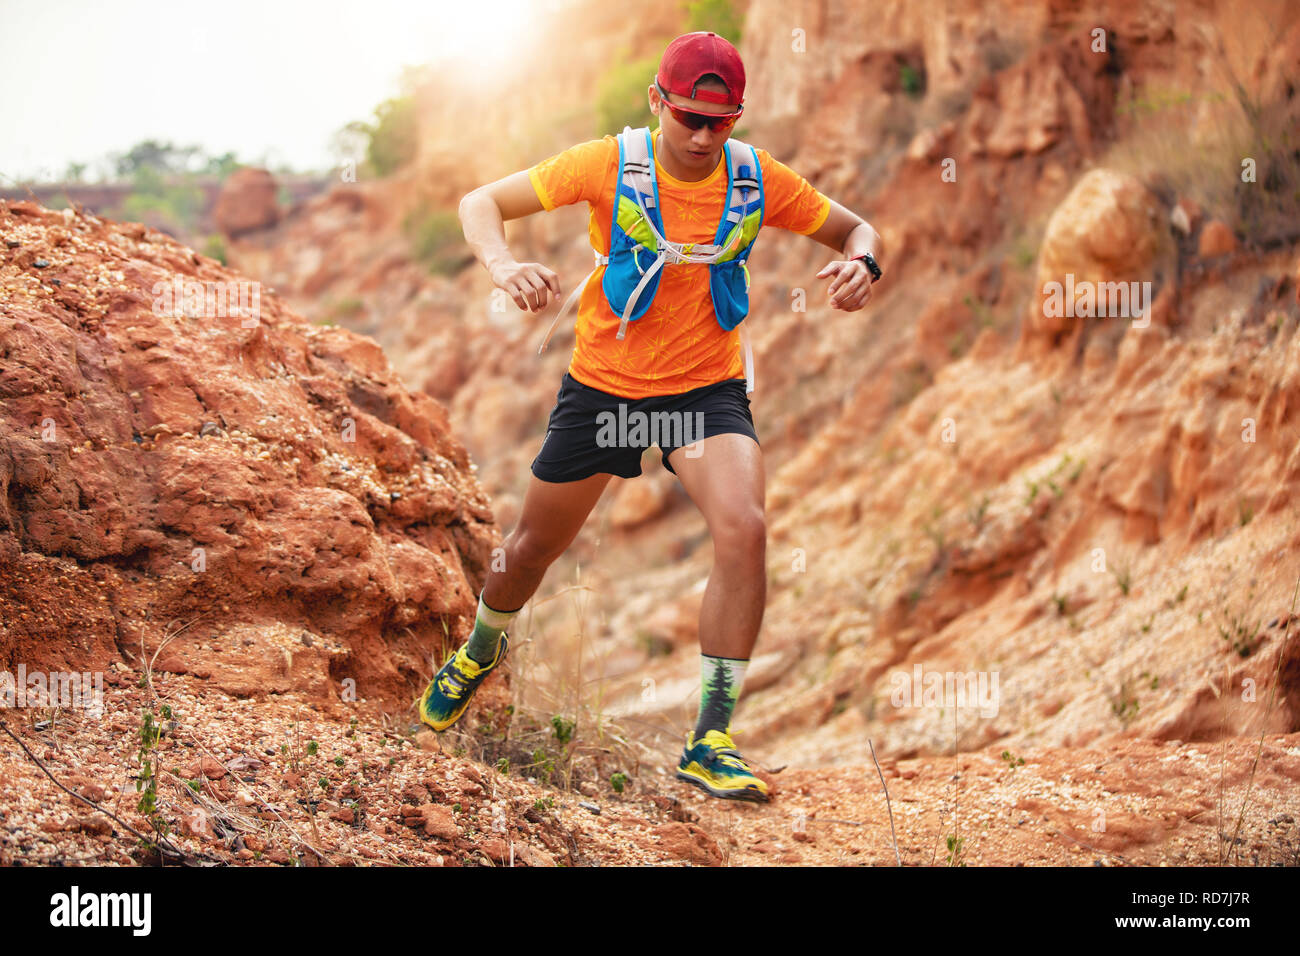 male runner in compression calf sleeve run over rocks Stock Photo